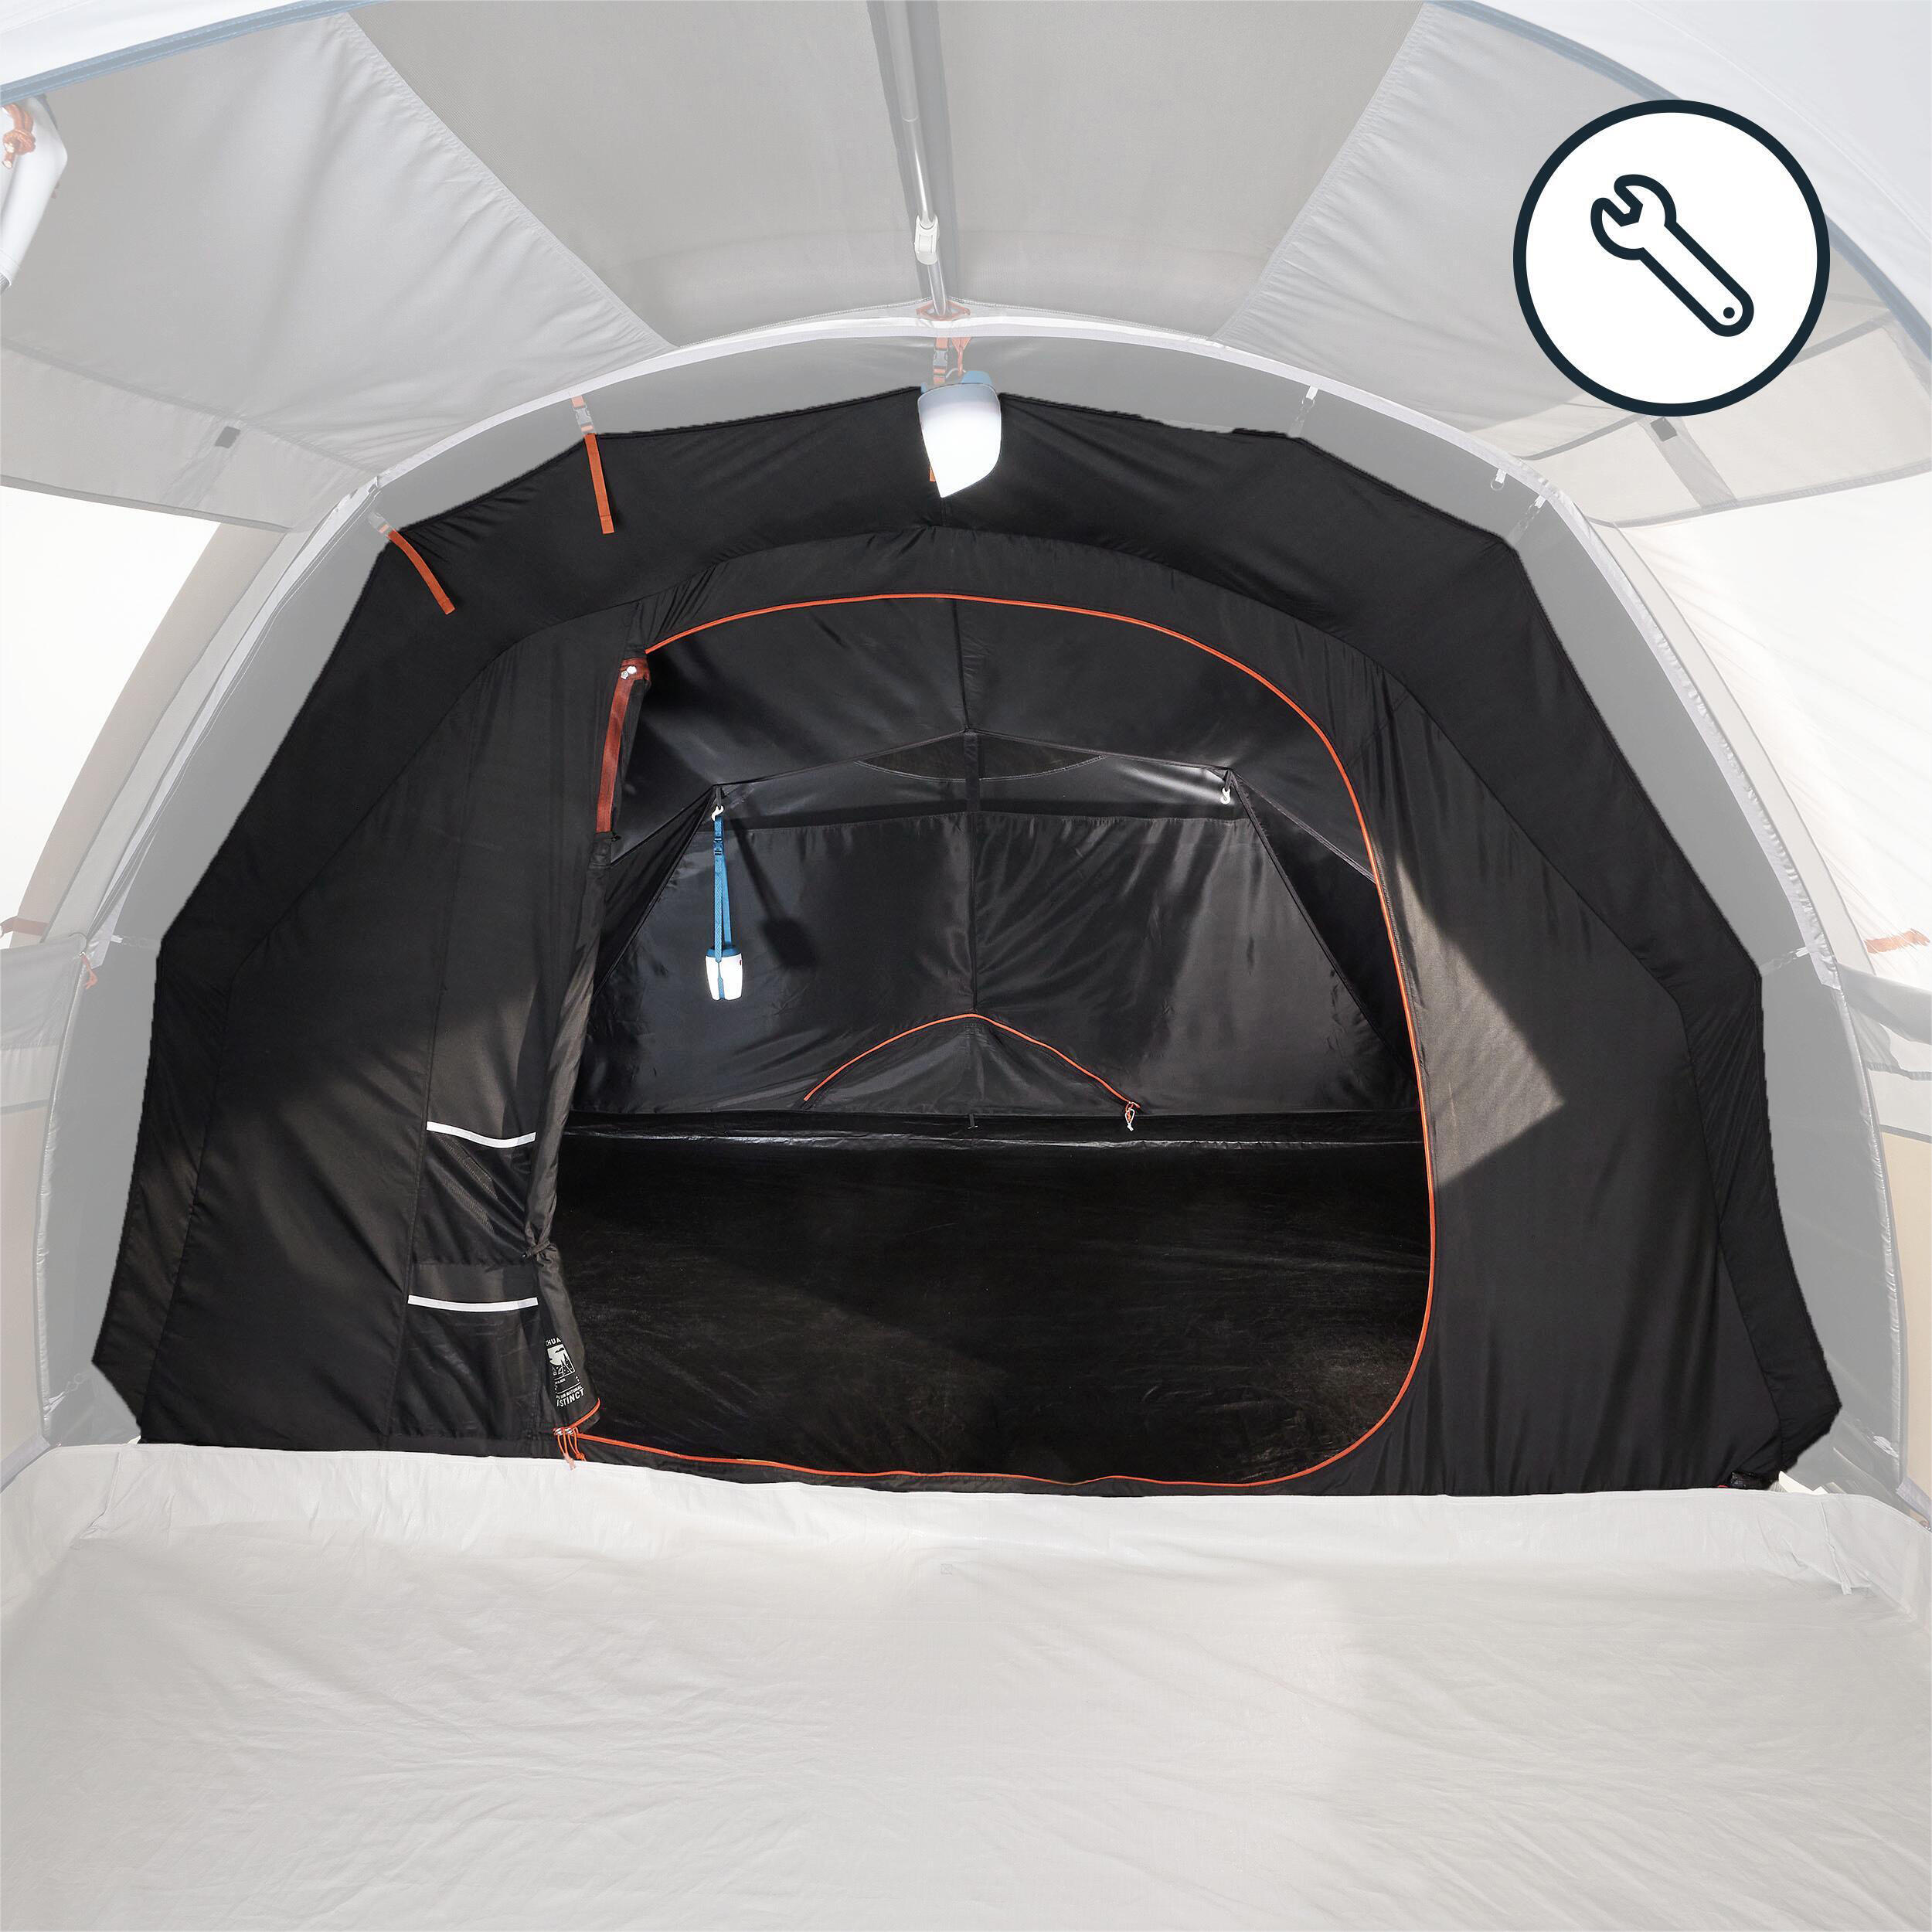 BEDROOM - REPLACEMENT PART FOR THE AIR SECONDS 4.1 FRESH&BLACK TENT 1/2